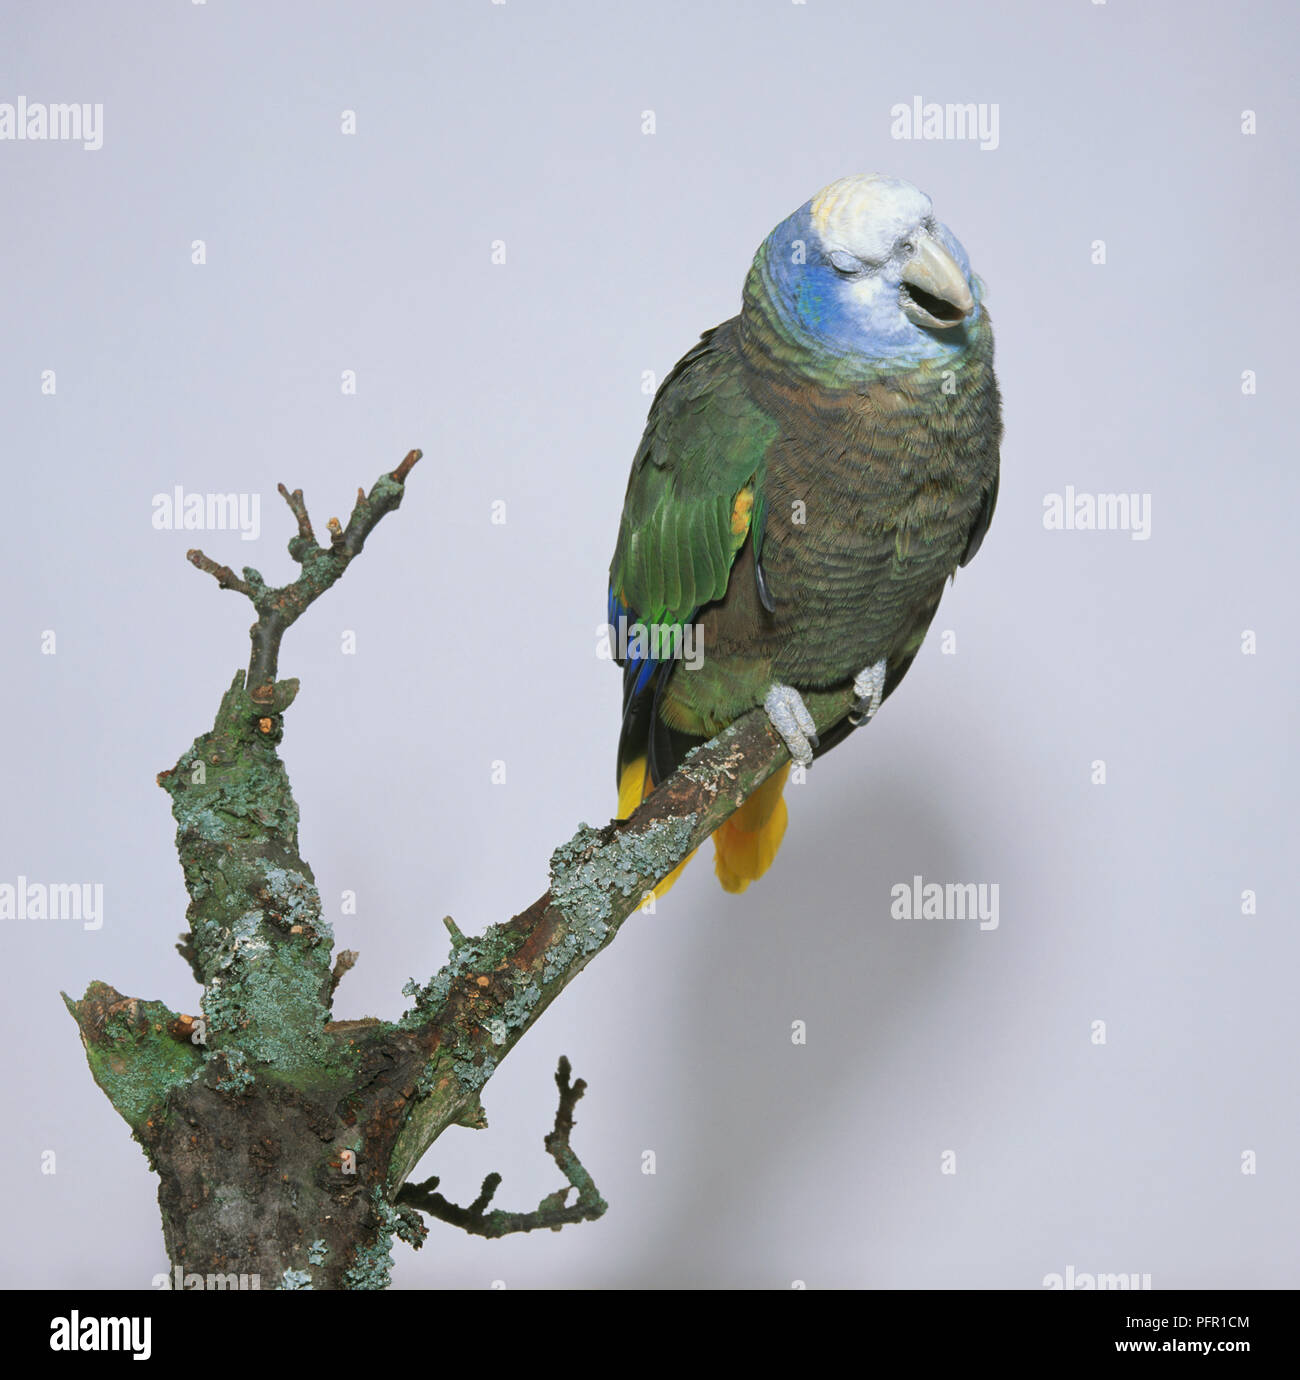 St. Vincent Amazon Parrot (Green Phase) perching on branch Stock Photo